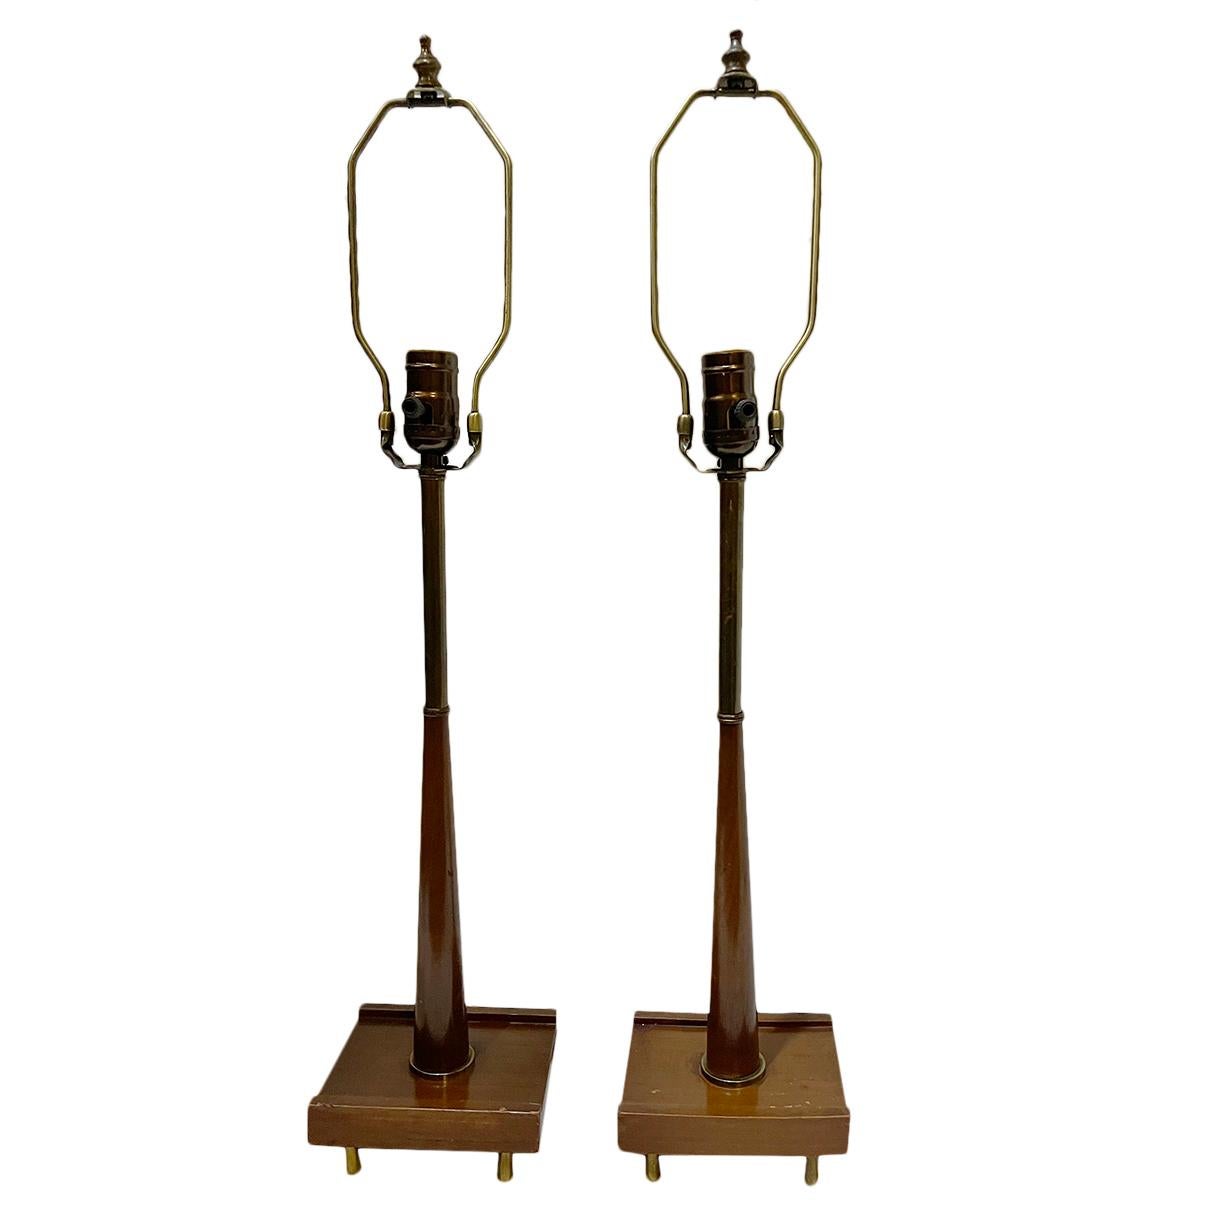 Pair of circa 1950's Danish modern wood table lamps.

Measurements:
Height of body: 18.5